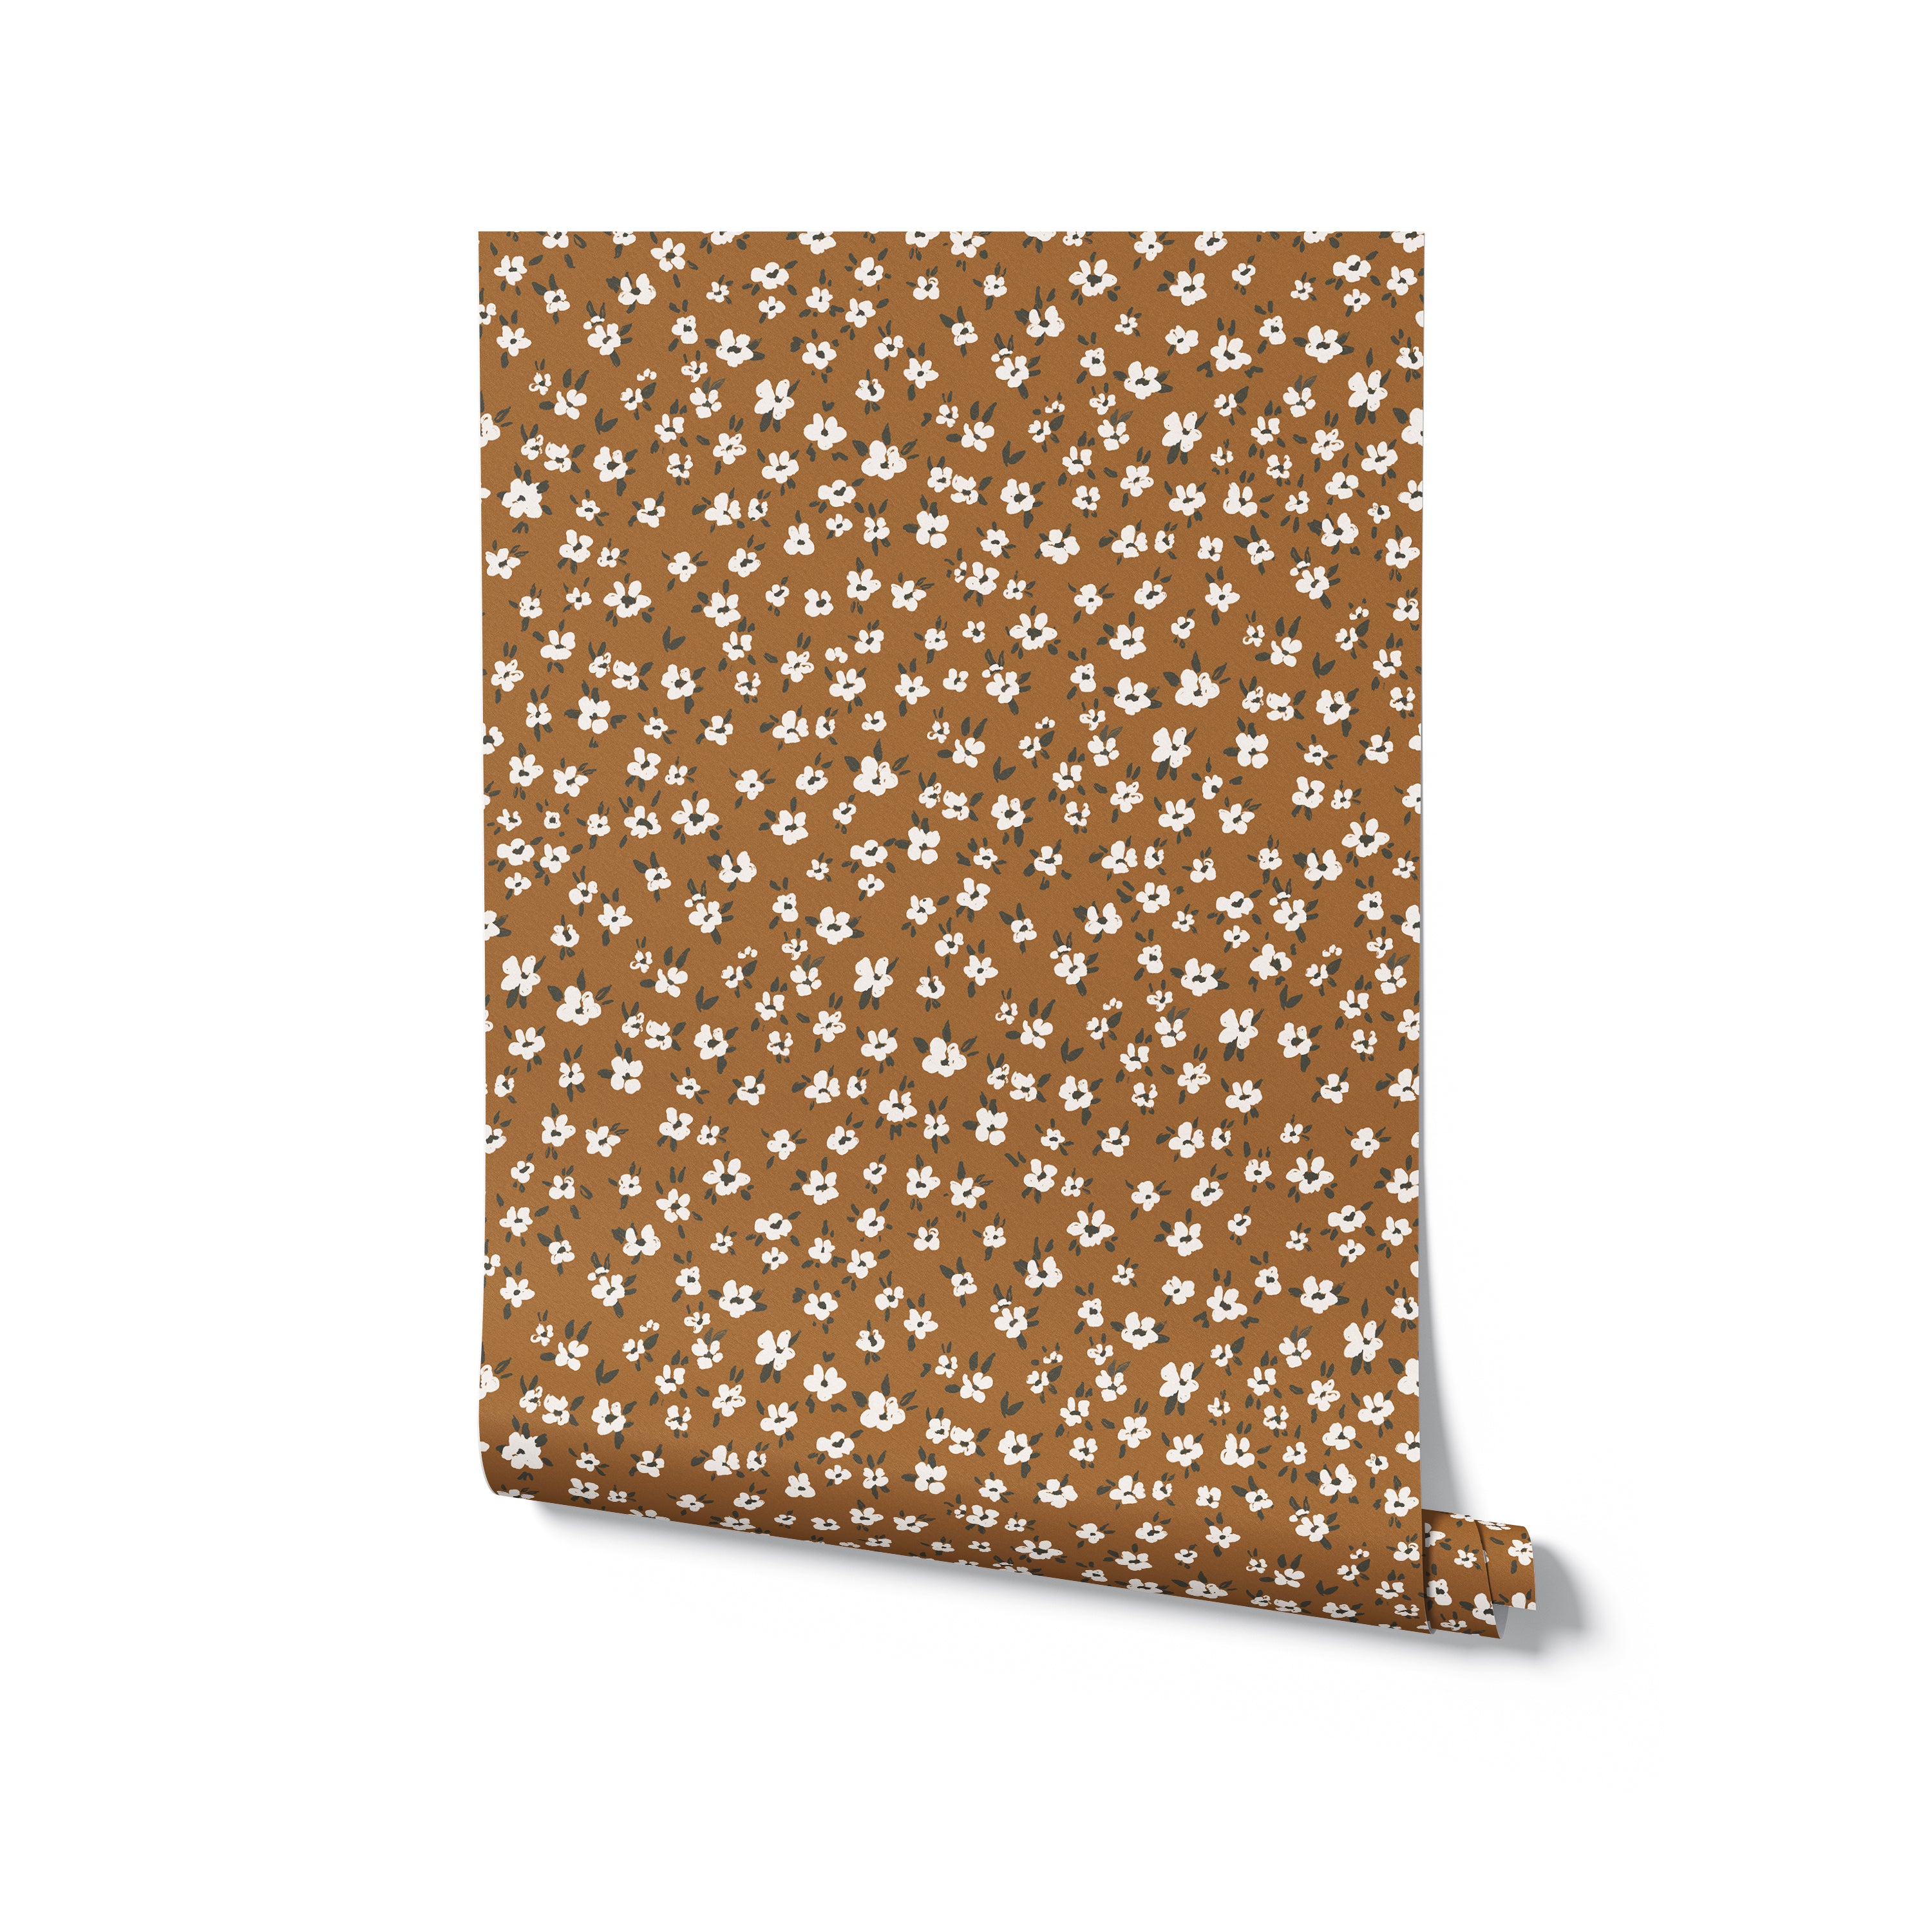 A roll of brown wallpaper featuring a pattern of small white flowers with a shadow cast on a white background, showcasing the texture and design of the wallpaper